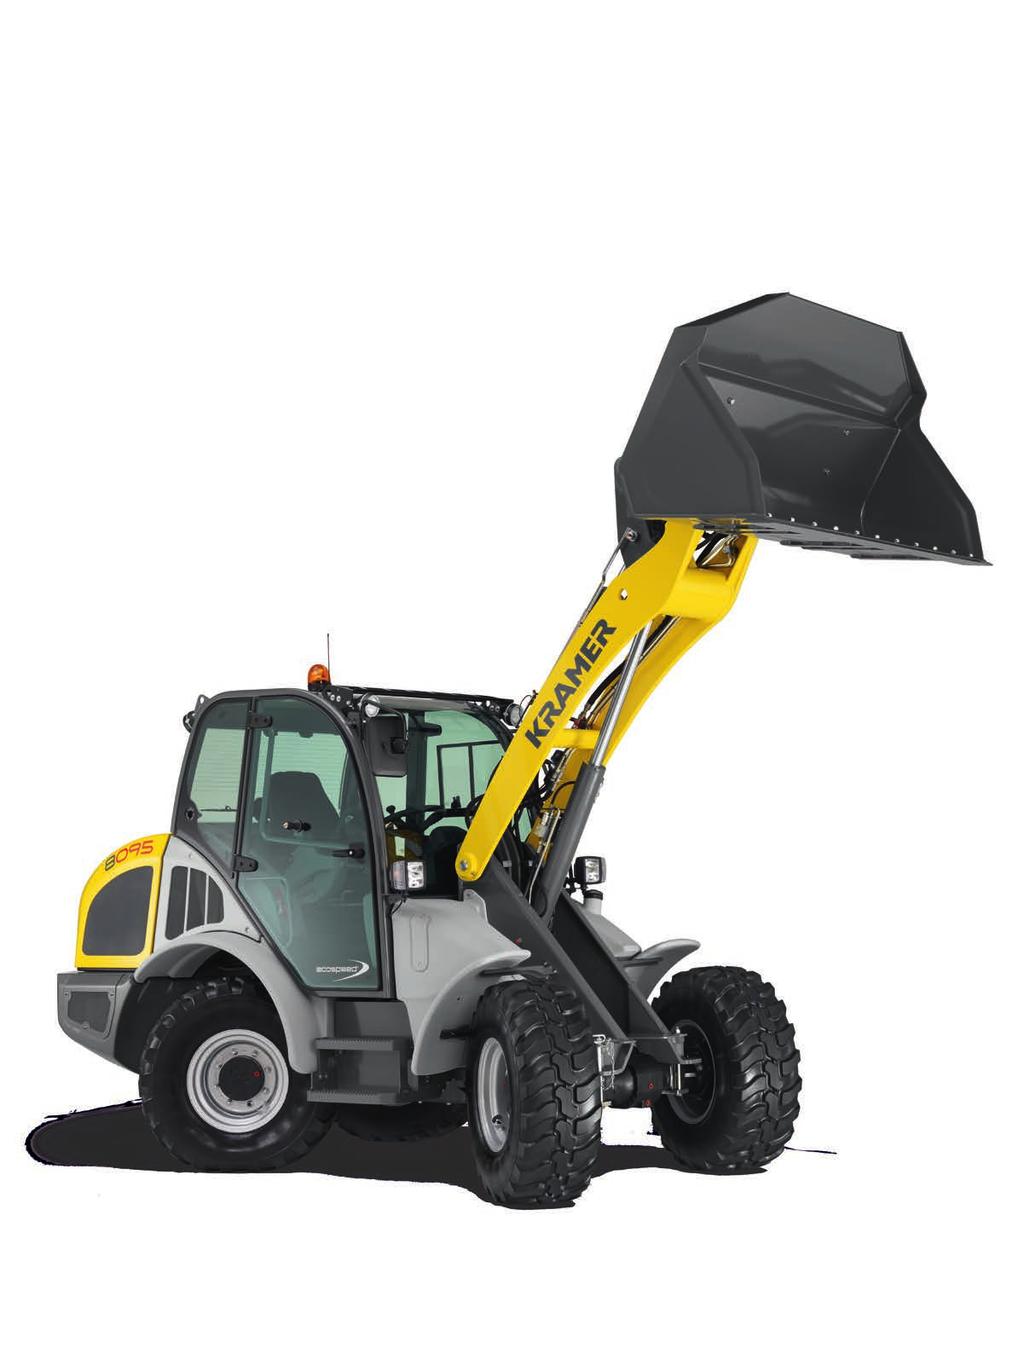 Your wishes. Many possibilities. 8075 8 8 8 8 8 8 STANDARD EQUIPMENT AND OPTIONS Bucket capacity (standard bucket) m 3 0,75 0,85 0,95 1,05 1,15 0,85 0,95 Operating weight (standard equipment) kg 4.